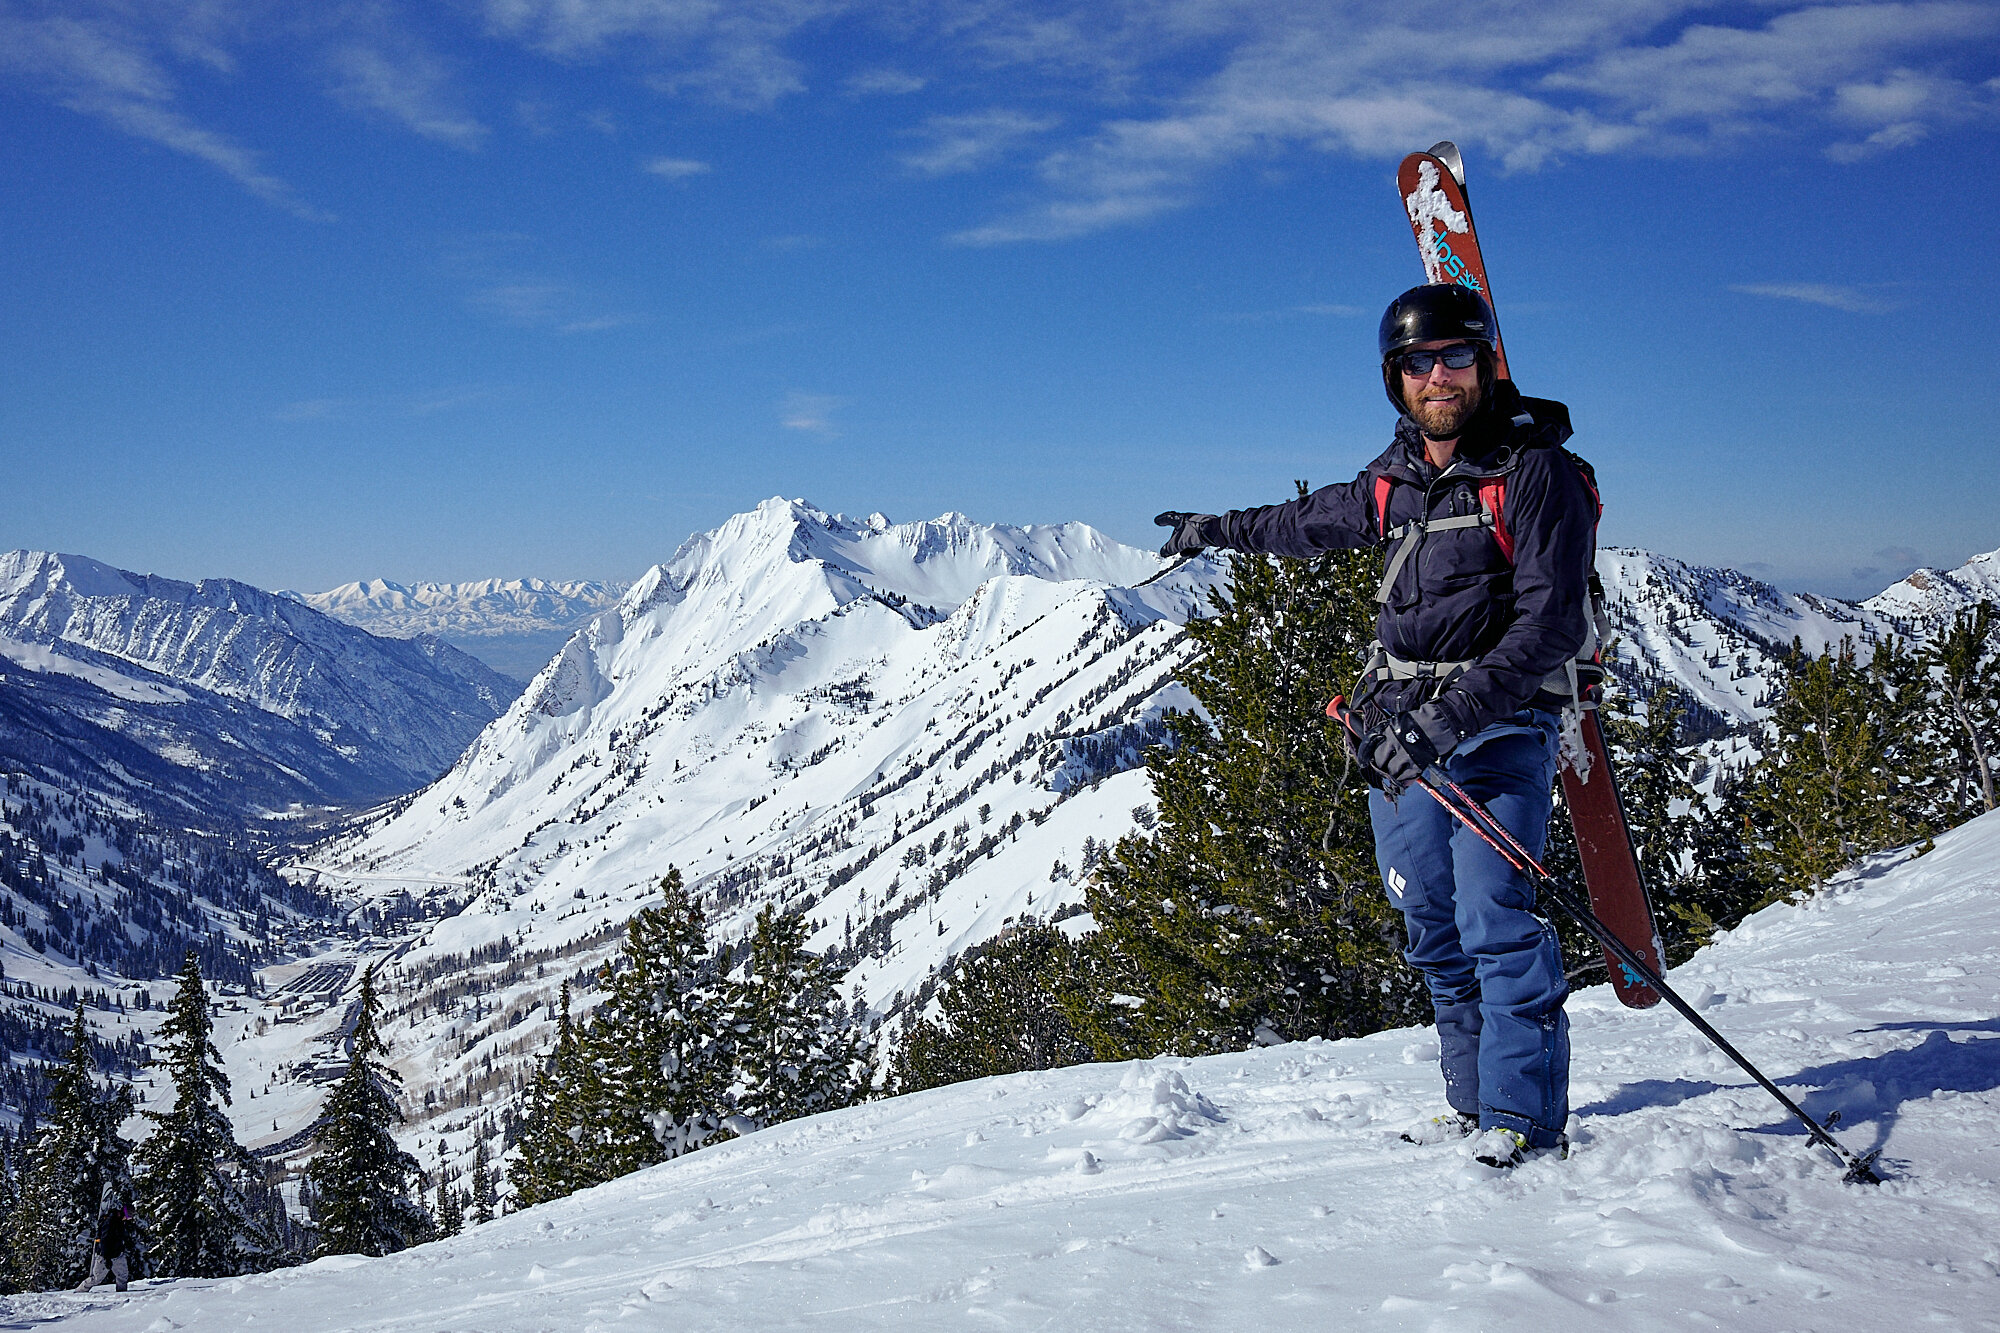  Matt on the summit of Honeycomb Cliffs with Mt. Superior in the background. | Big Cottonwood Canyon, UT 2/13/20 